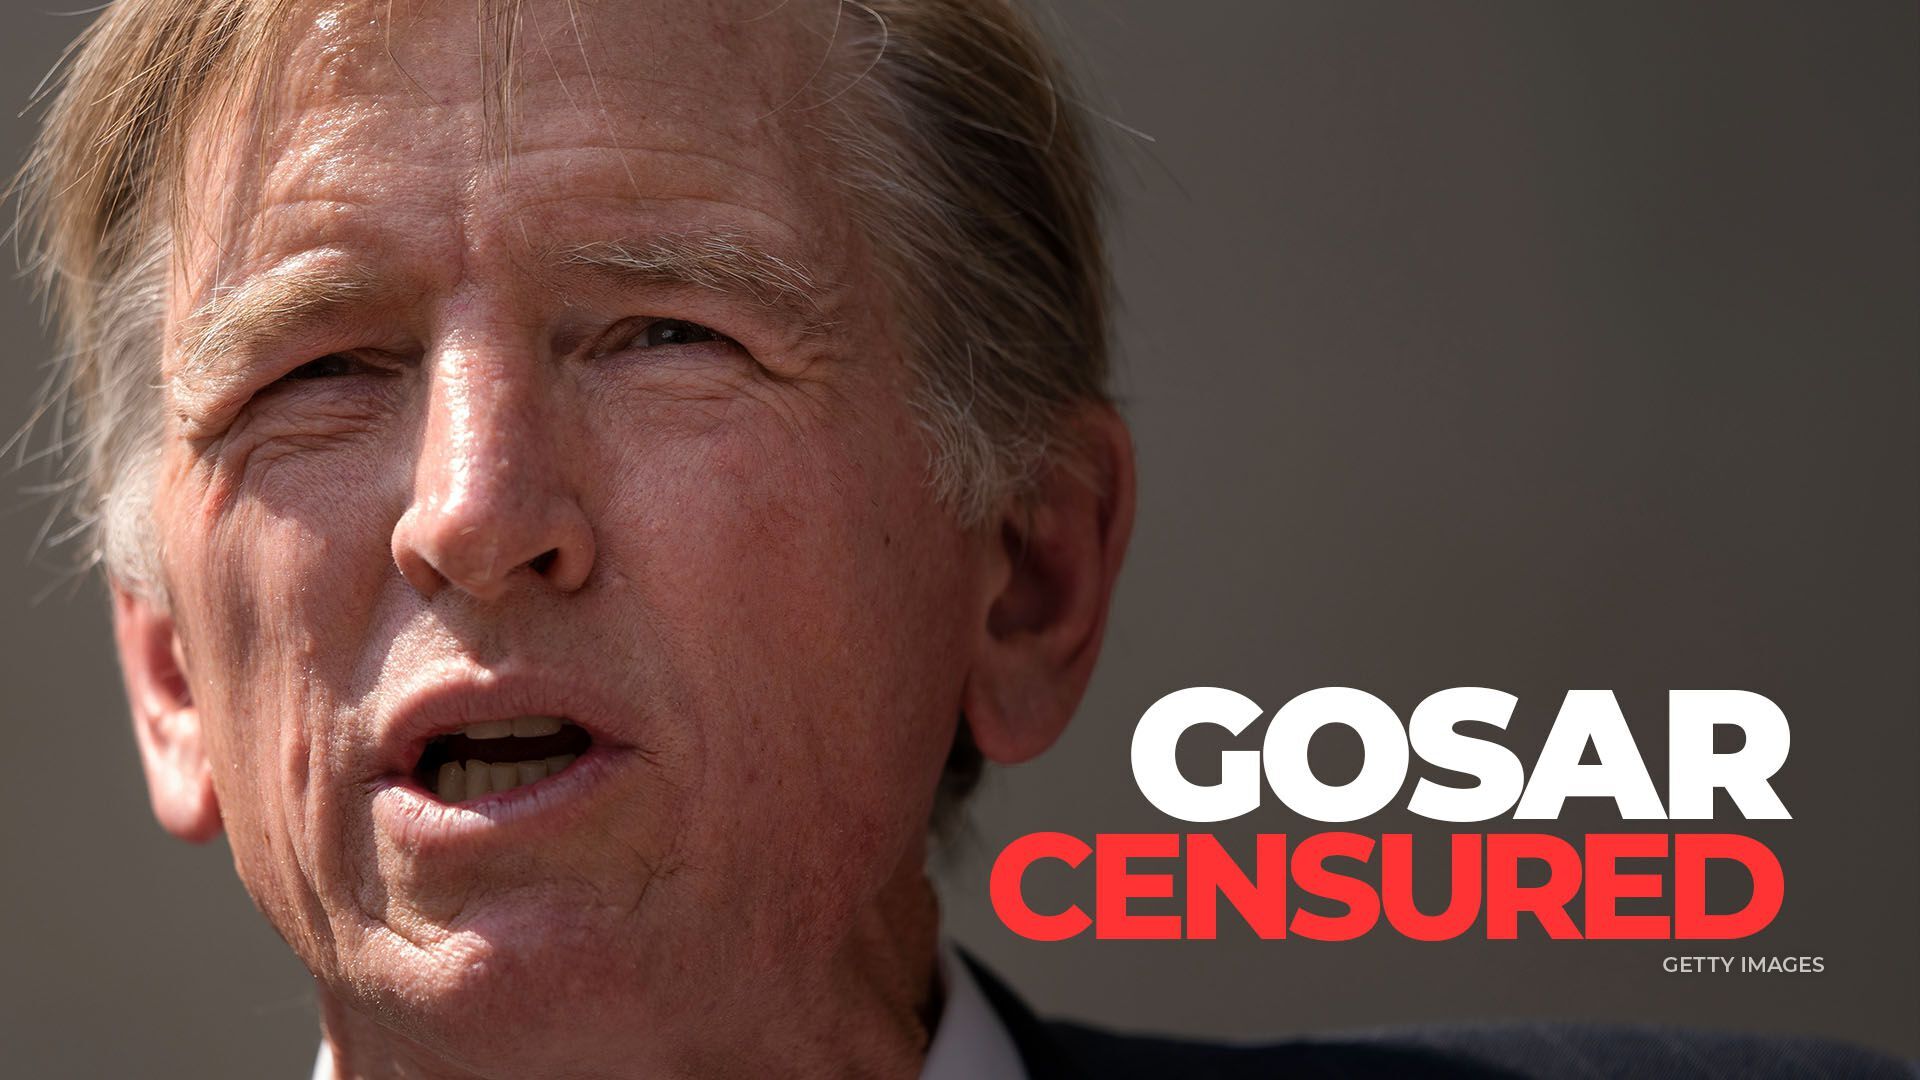 The House voted to censure Rep. Gosar